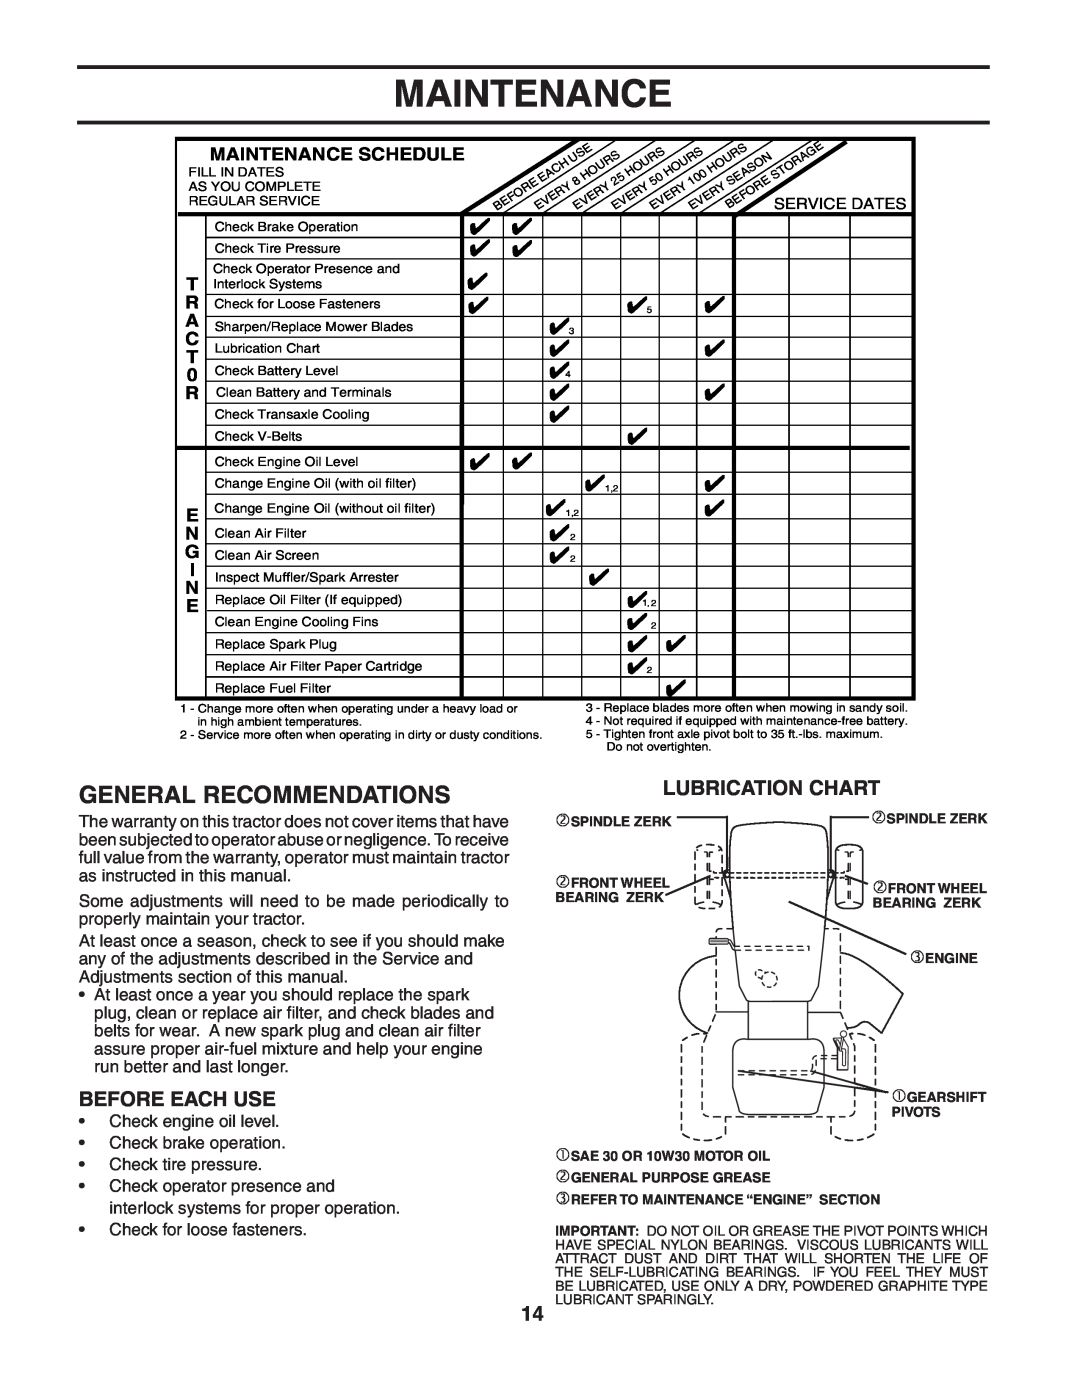 Poulan 188870 manual Maintenance, General Recommendations, Before Each Use, Lubrication Chart 